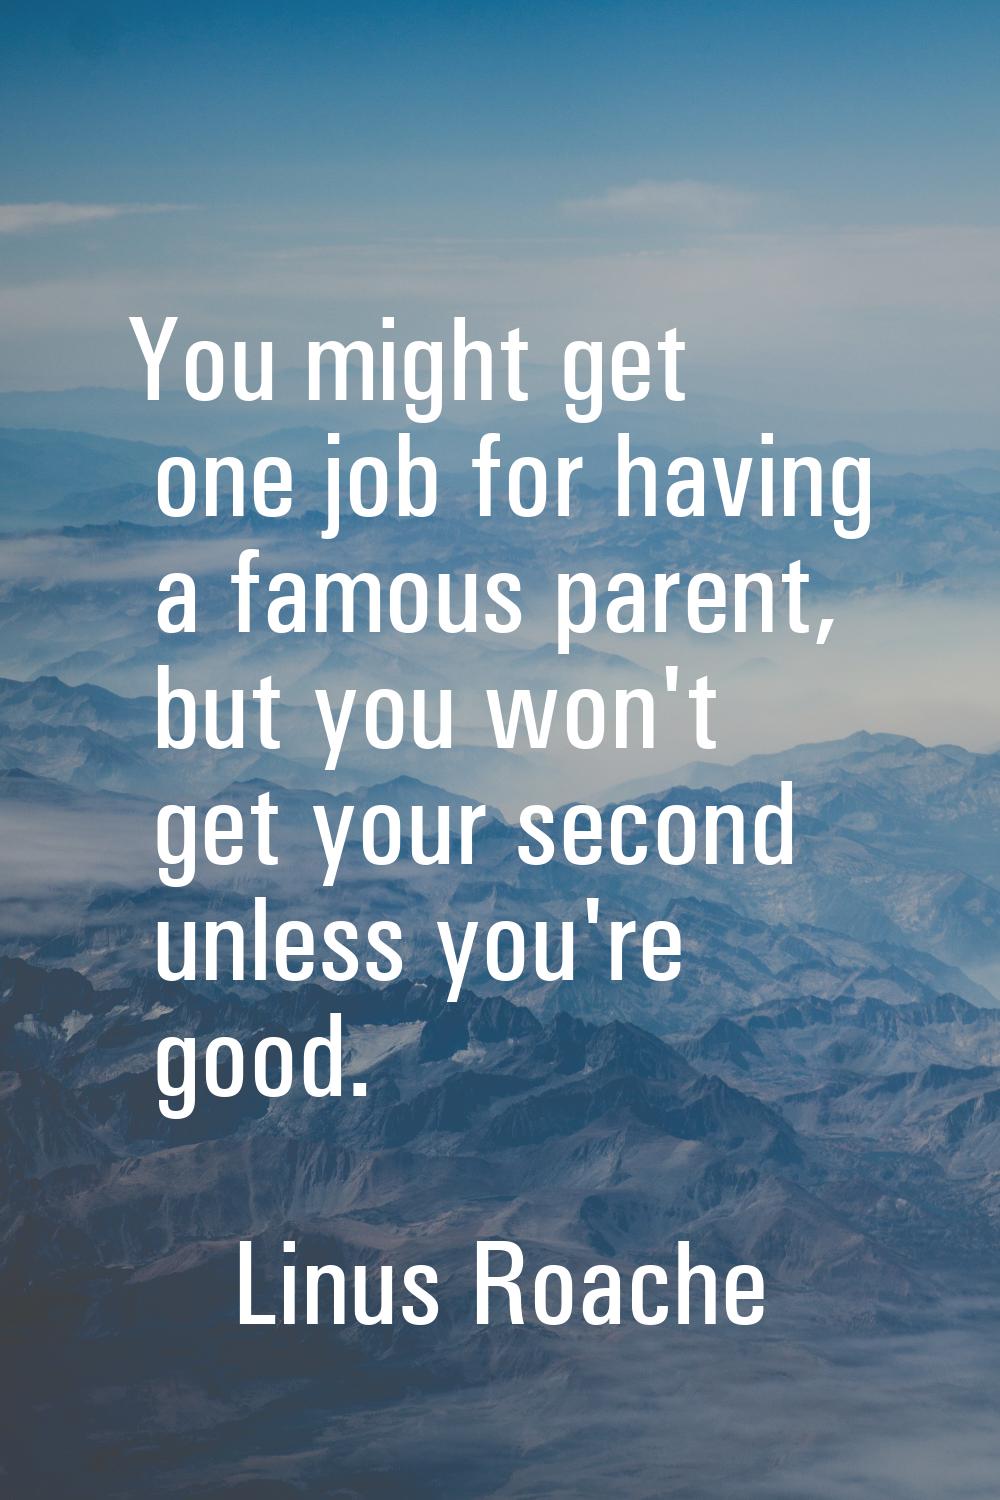 You might get one job for having a famous parent, but you won't get your second unless you're good.